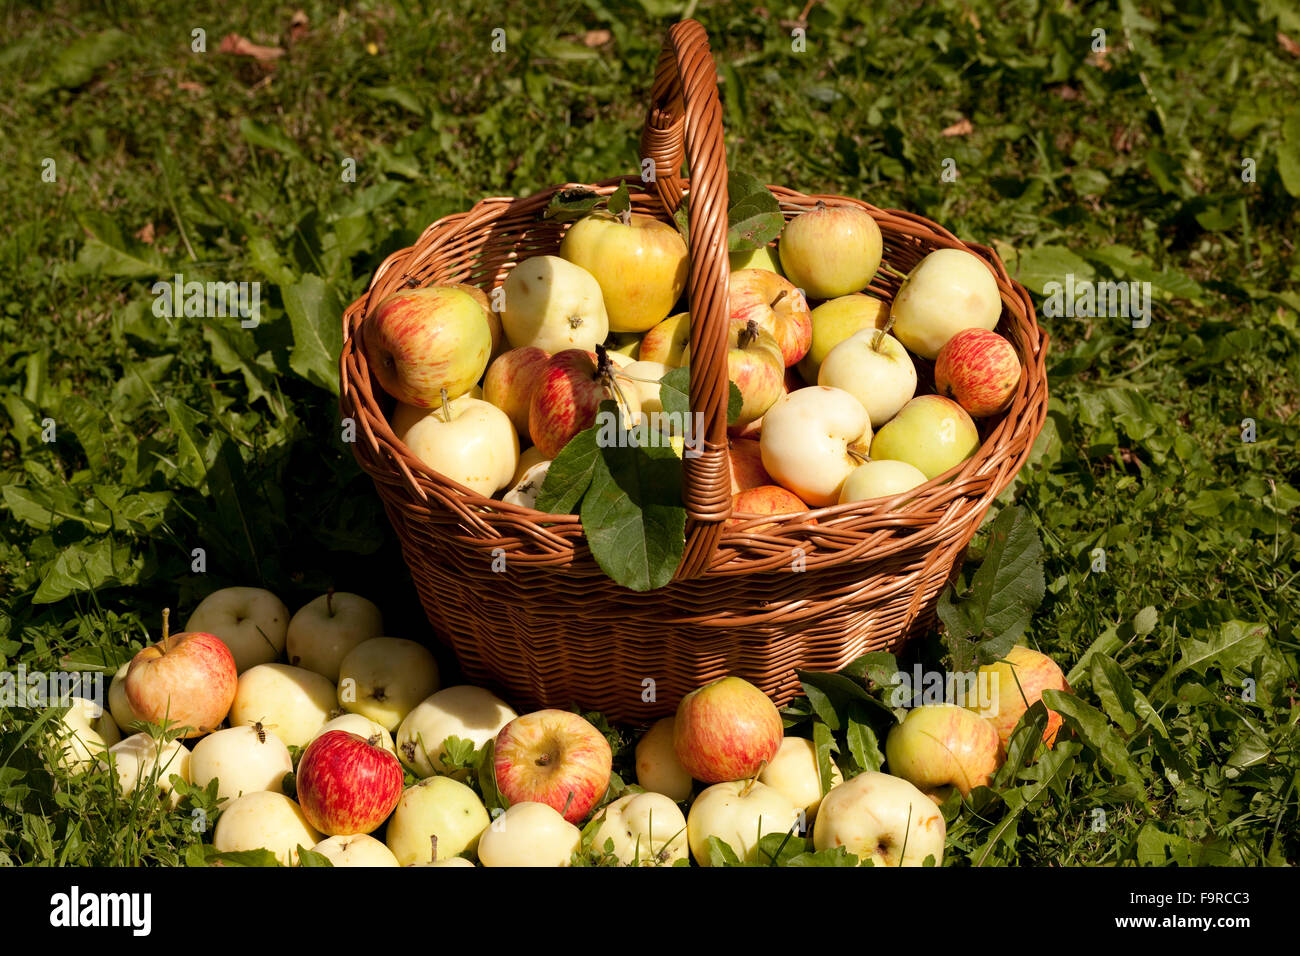 a lot of quantity of apples on grass and in basket Stock Photo